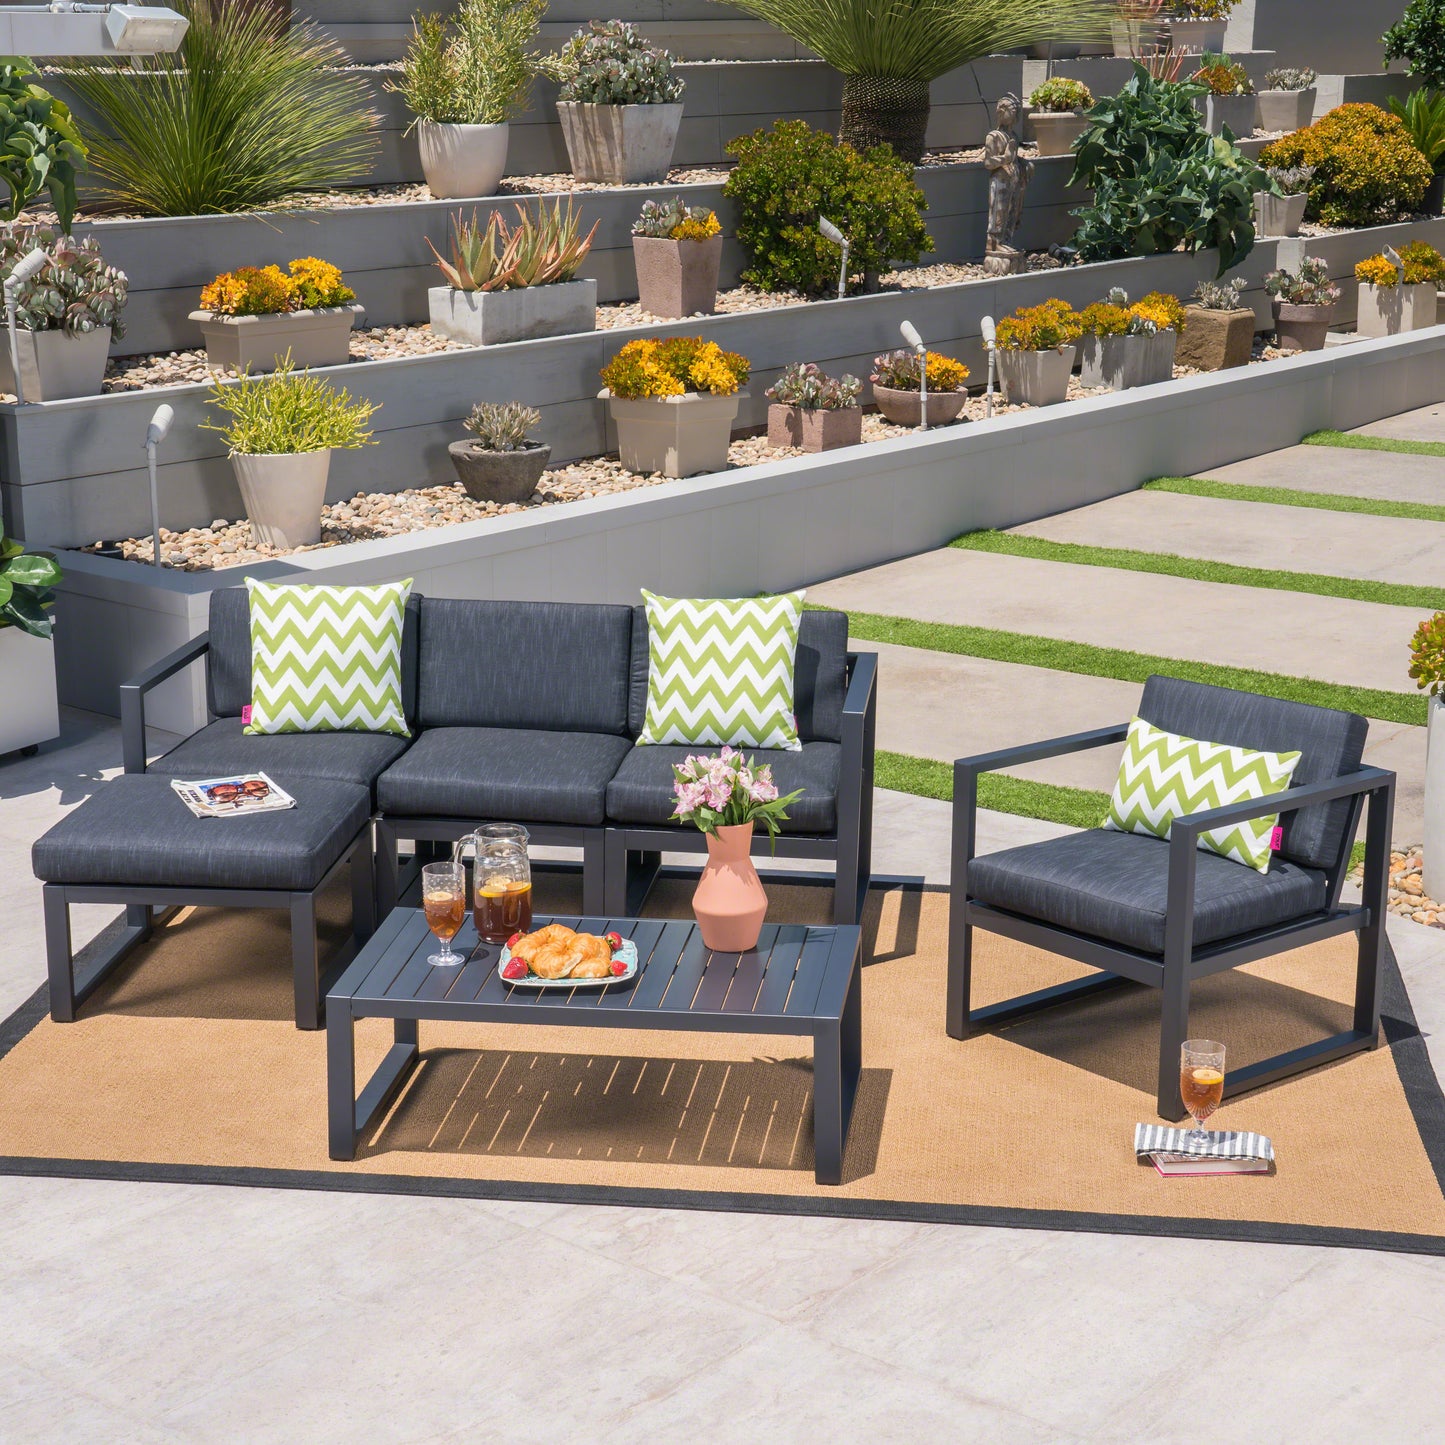 Wos Outdoor 4-Seater Aluminum Sofa Set with Ottoman and Coffee Table, Black and Dark Gray